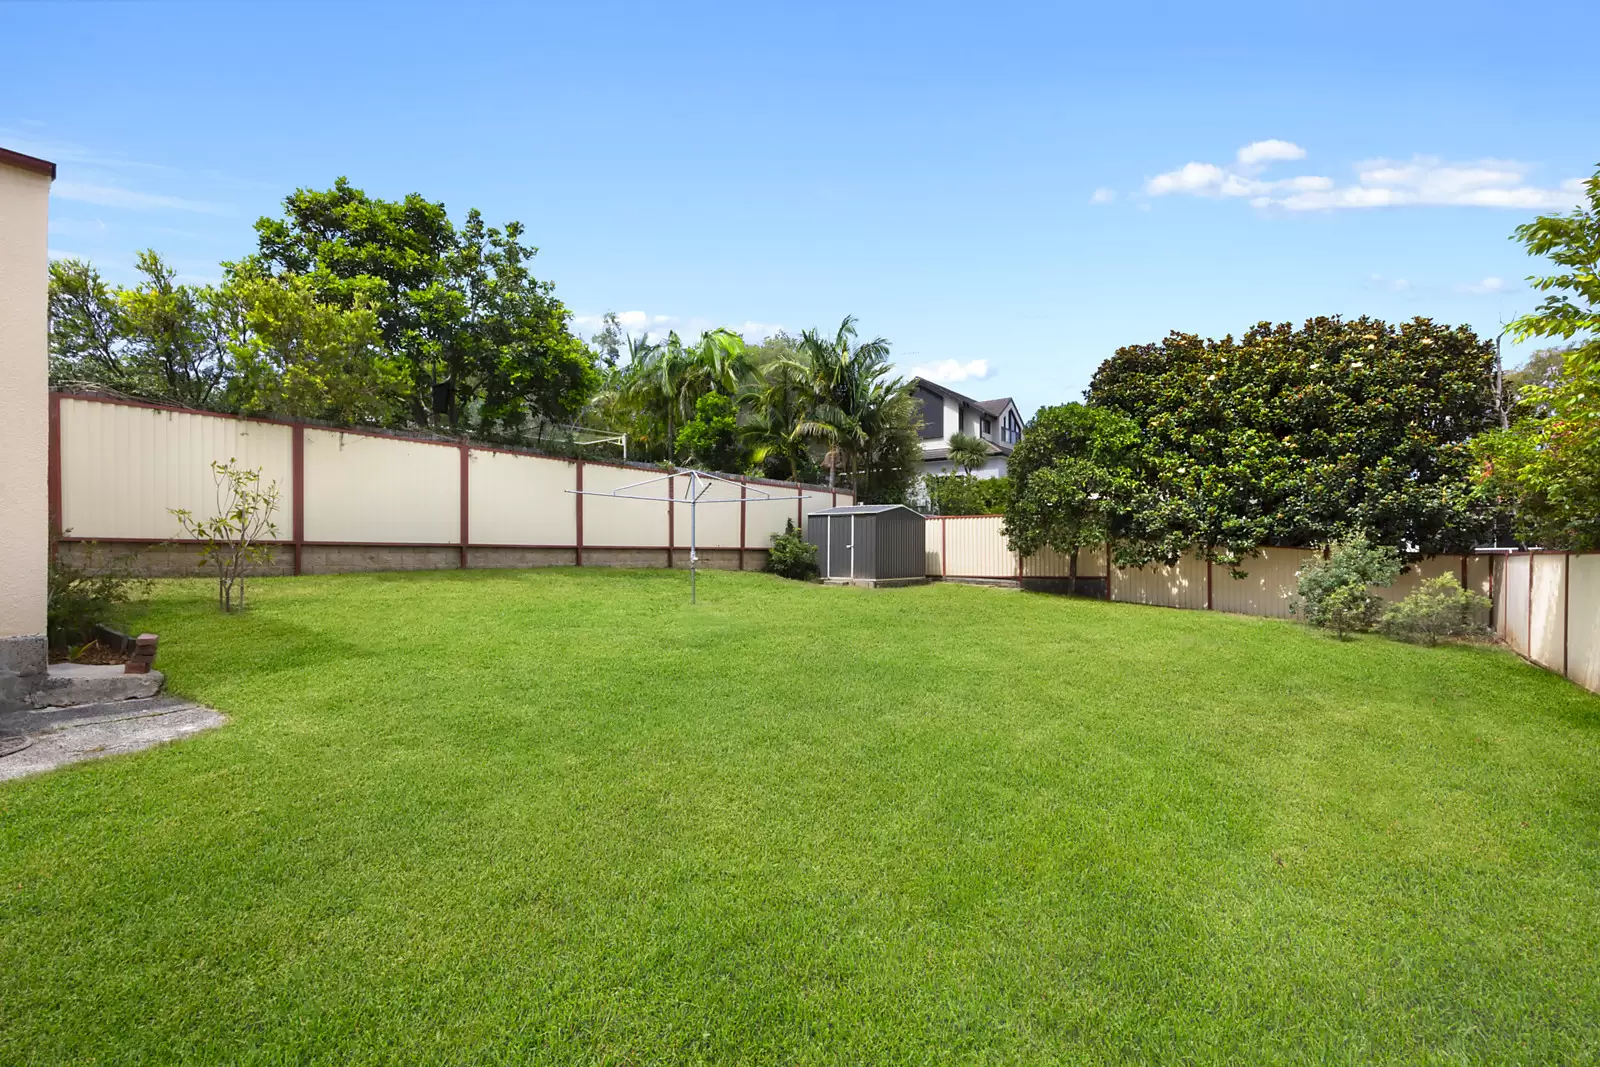 Photo #7: 31 Balfour Road, Kensington - Auction by Sydney Sotheby's International Realty